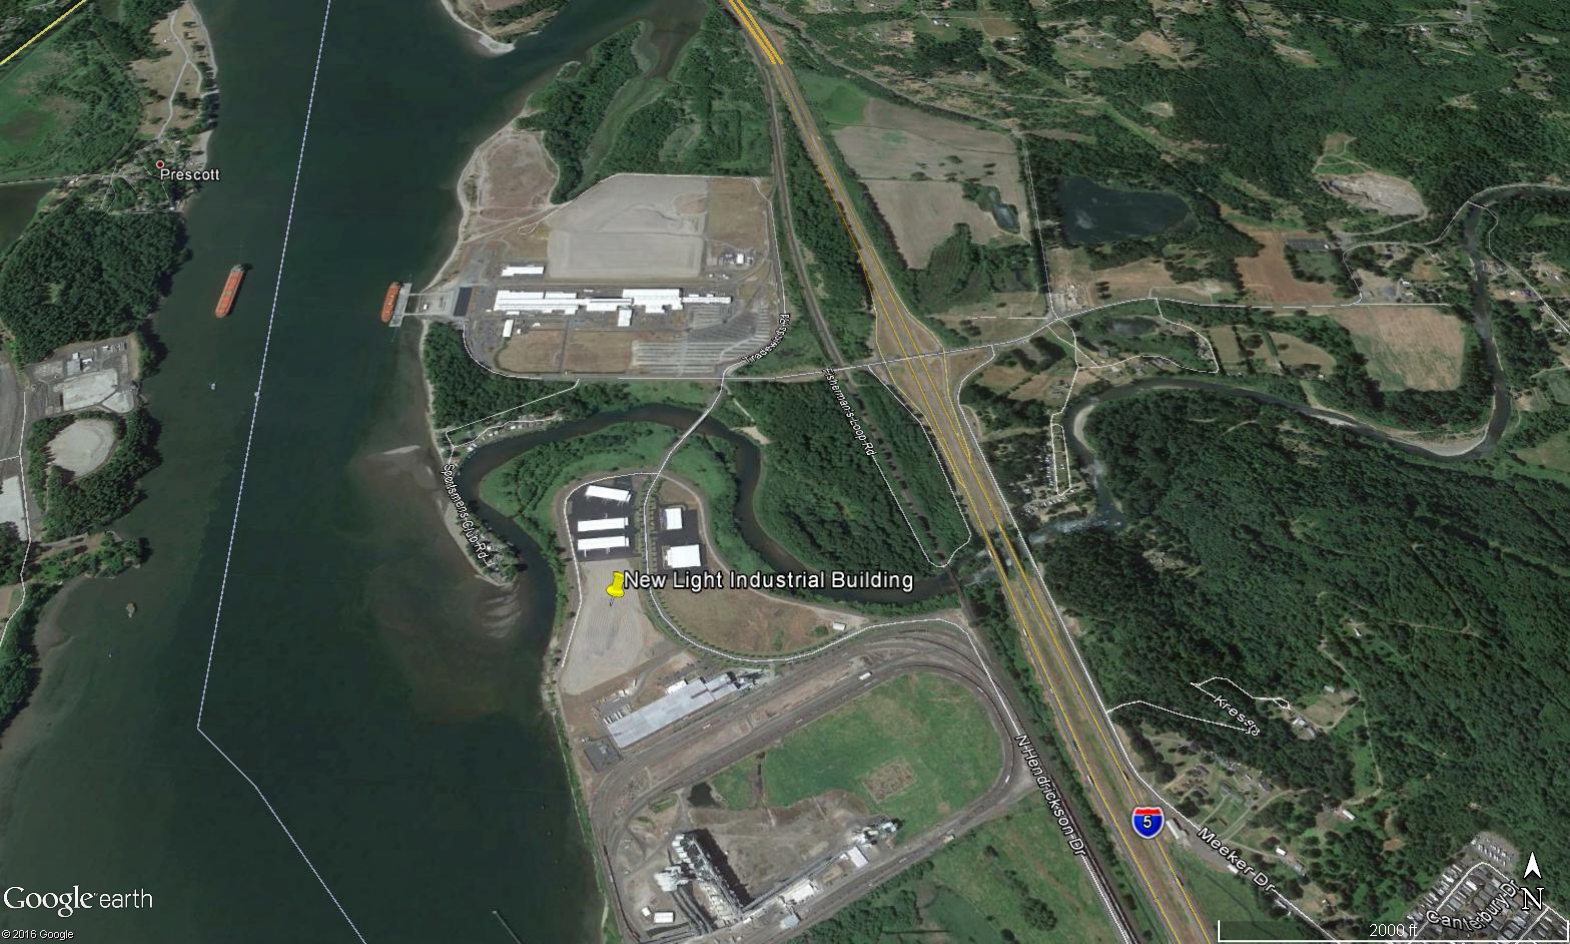 Demand for industrial & manufacturing facilities is on the rise in Kalama, Washington.